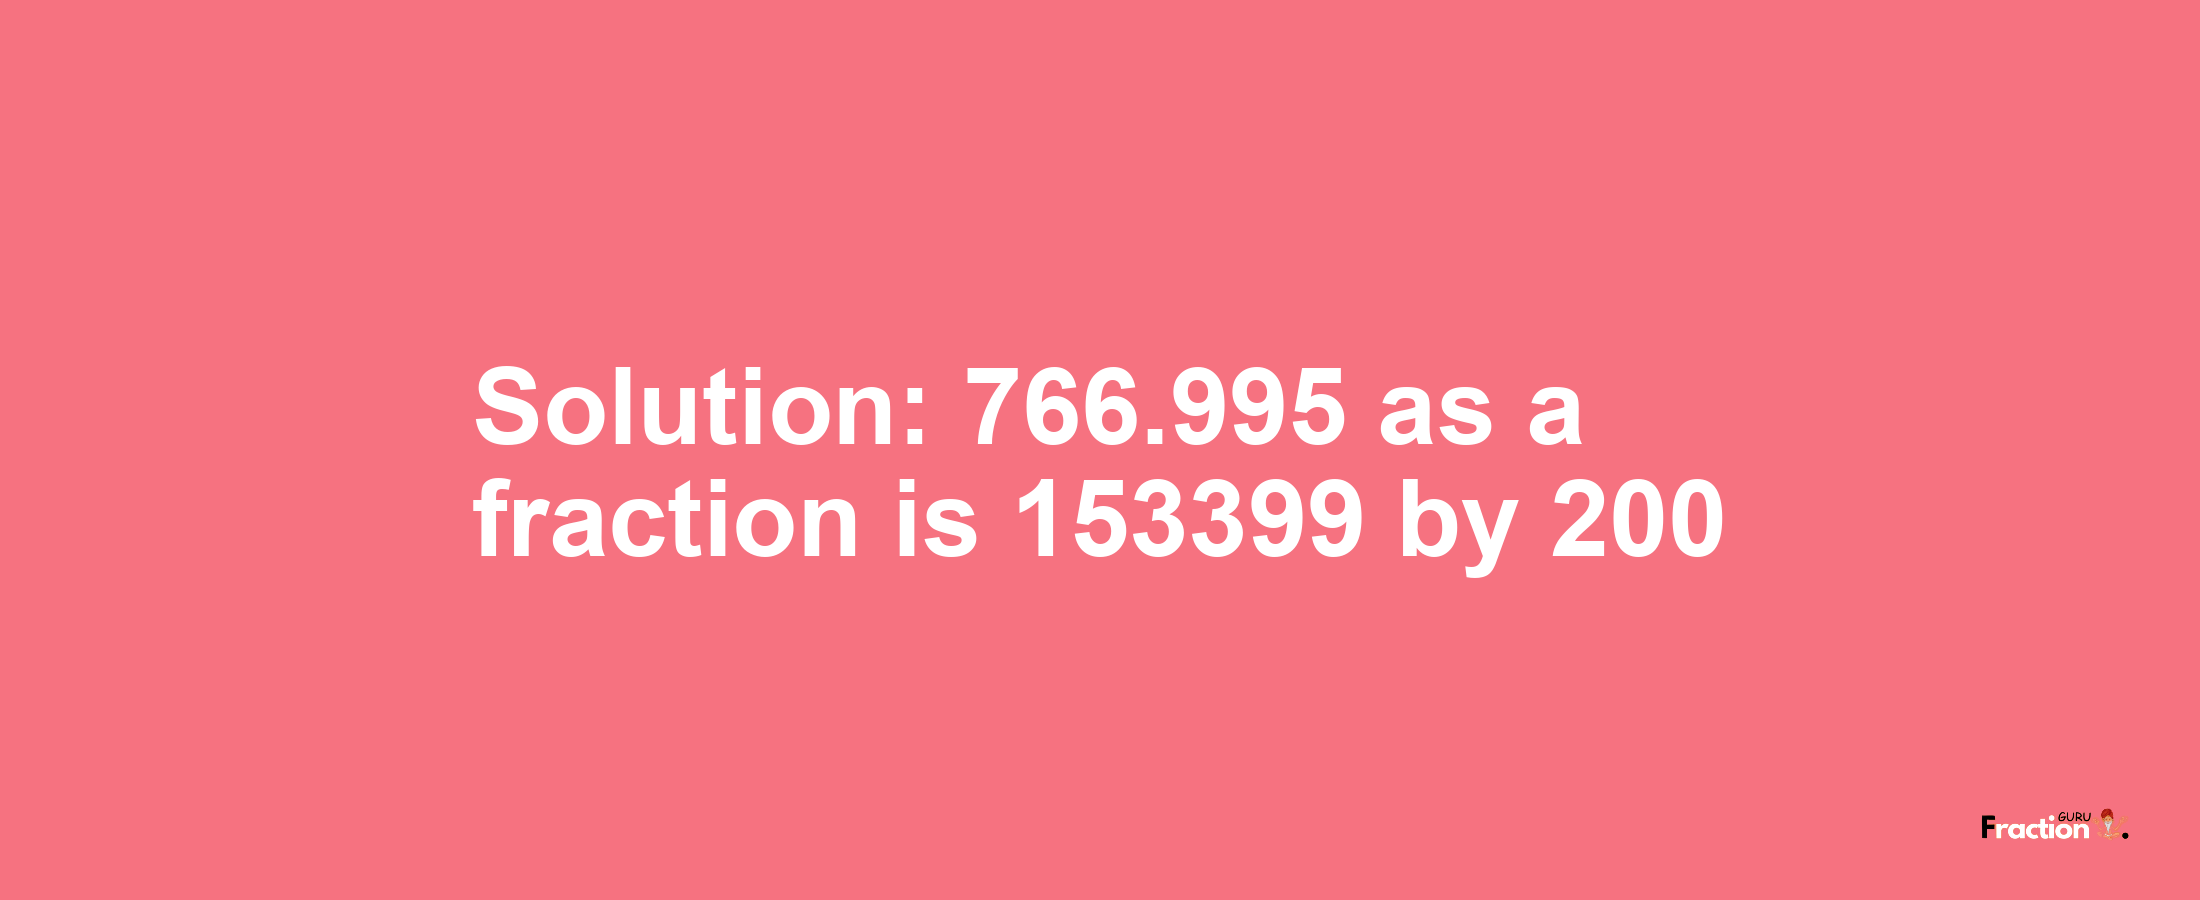 Solution:766.995 as a fraction is 153399/200